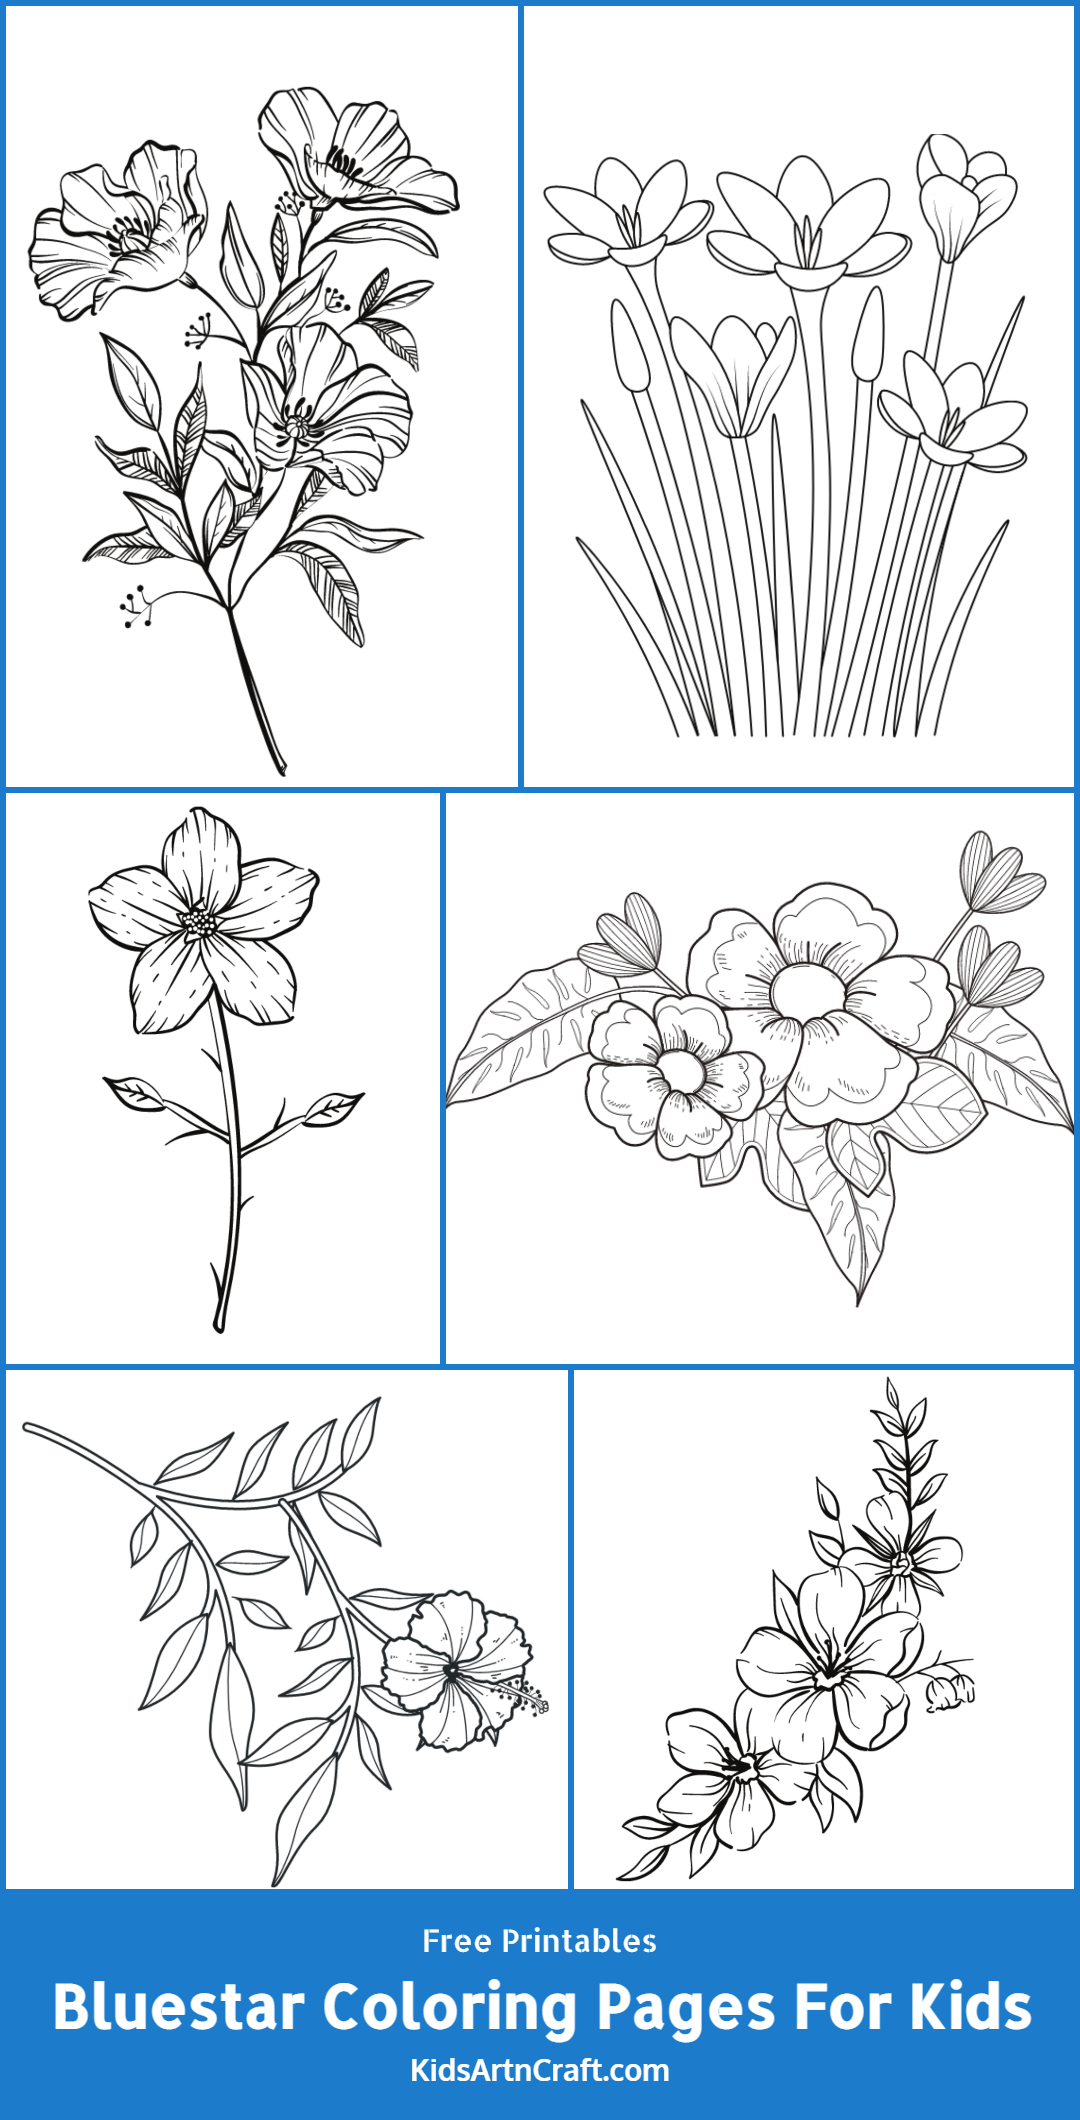 Bluestar Coloring Pages For Kids – Free Printables